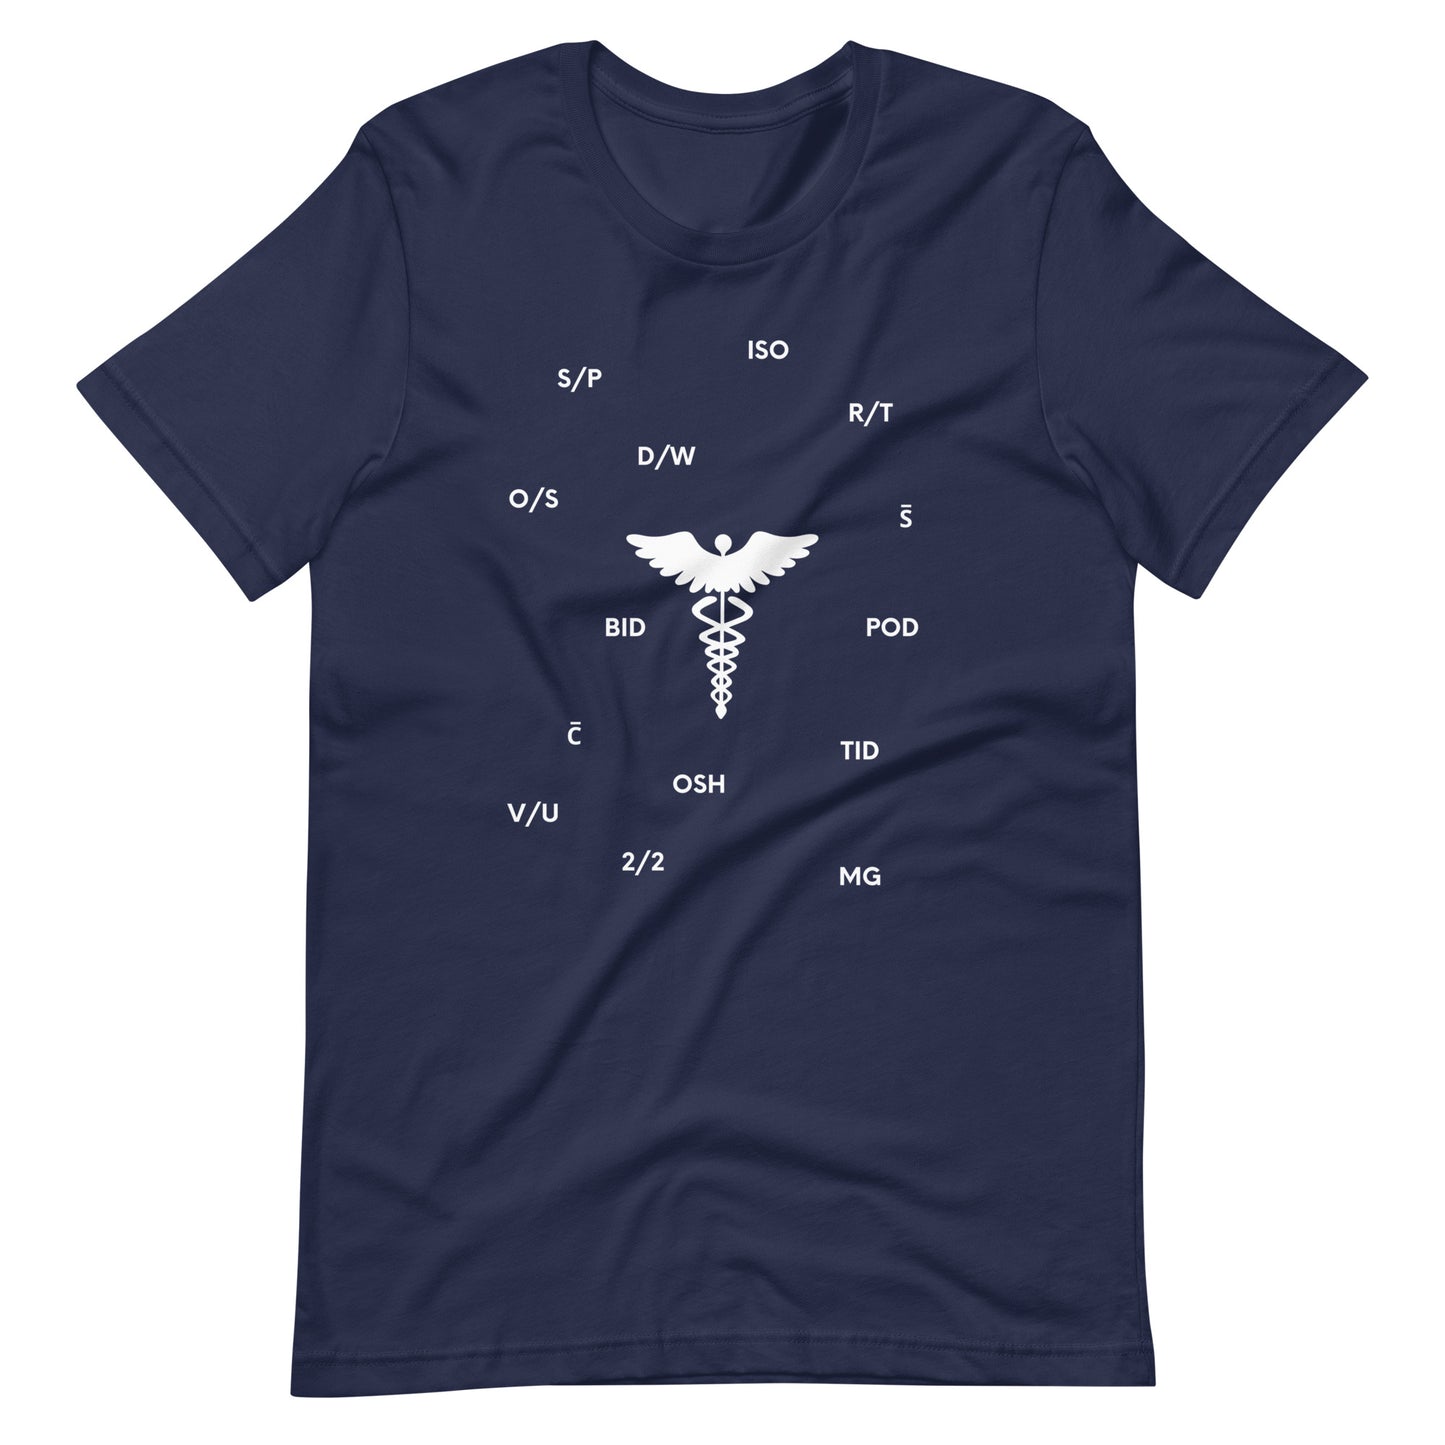 Graphic Tee, Abbreviations, Funny Doctor Shirt, Medical Student, Funny Nurse Shirt, Funny Resident Shirt, Doctor, Physician, Resident, Nurse, PA, NP, Medical Student